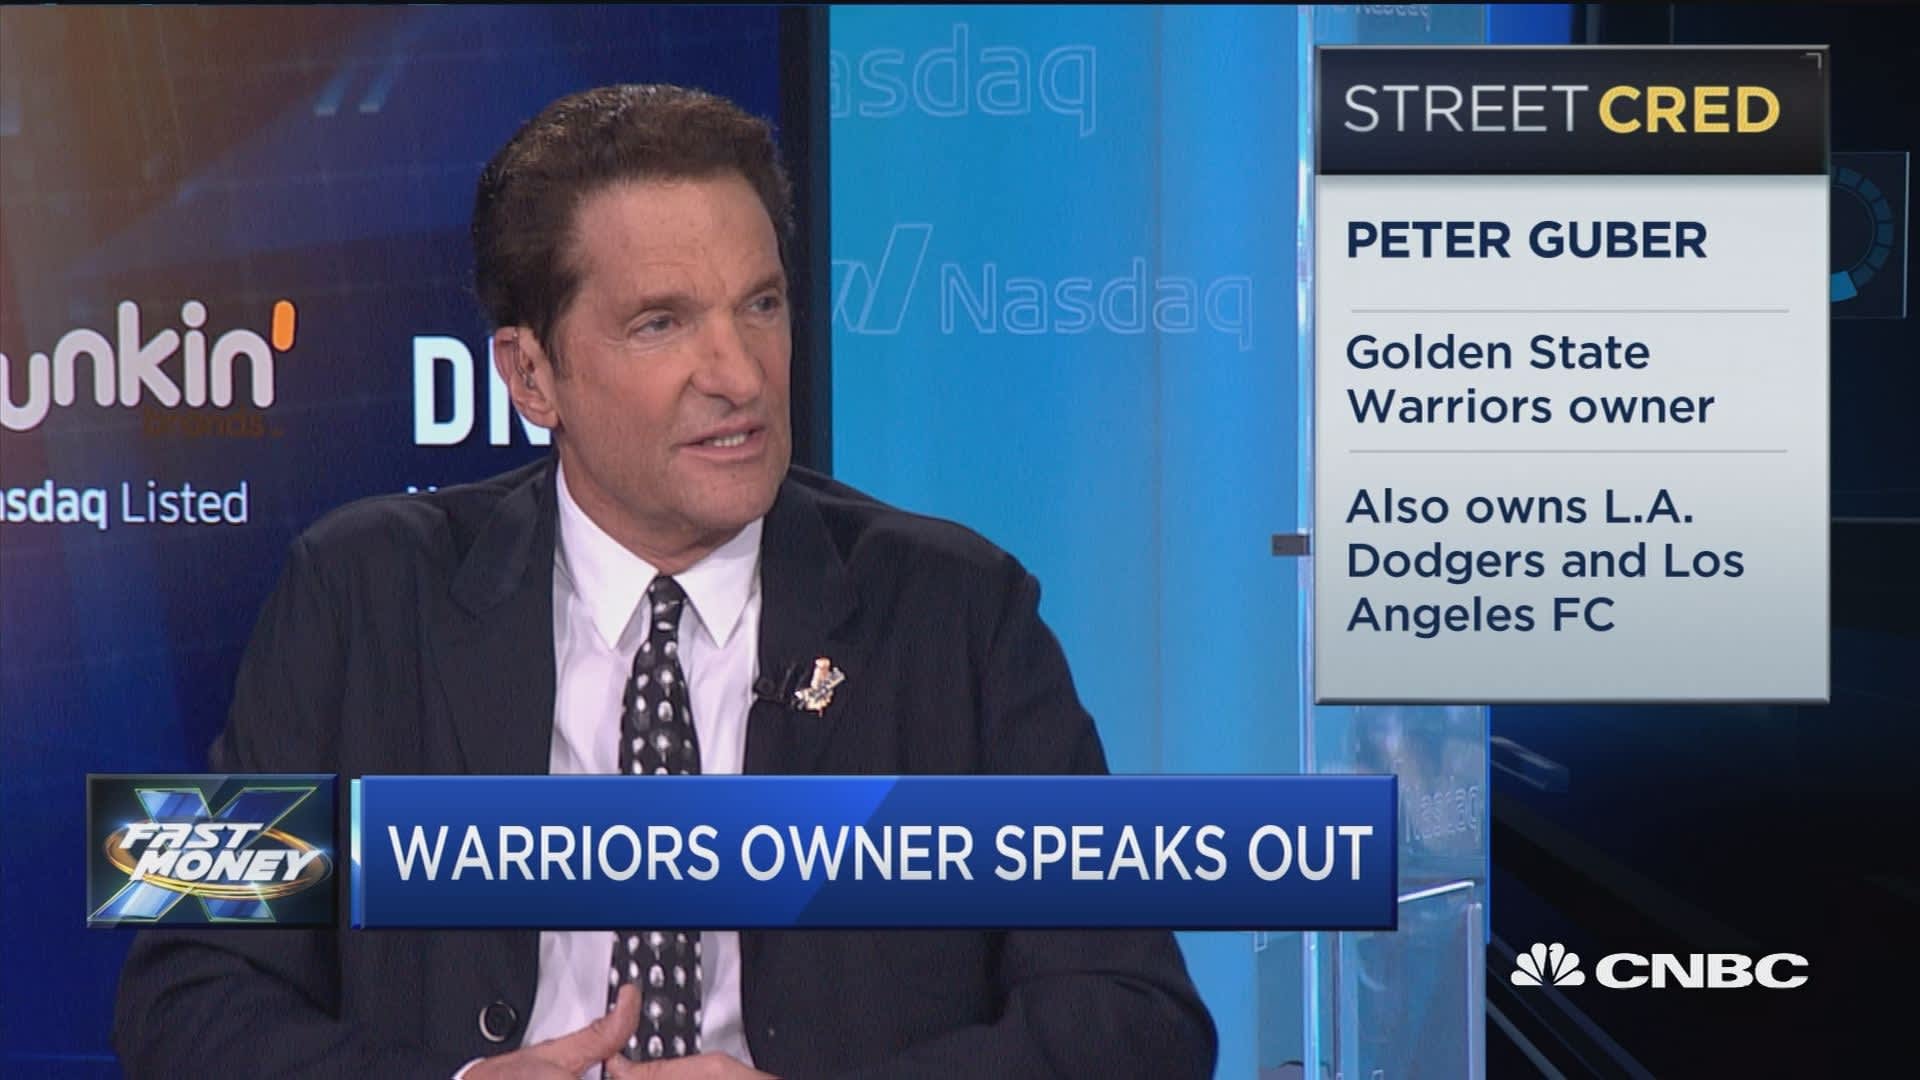 Golden State Warriors owner Peter Guber speaks out on Trump and the NFL protests